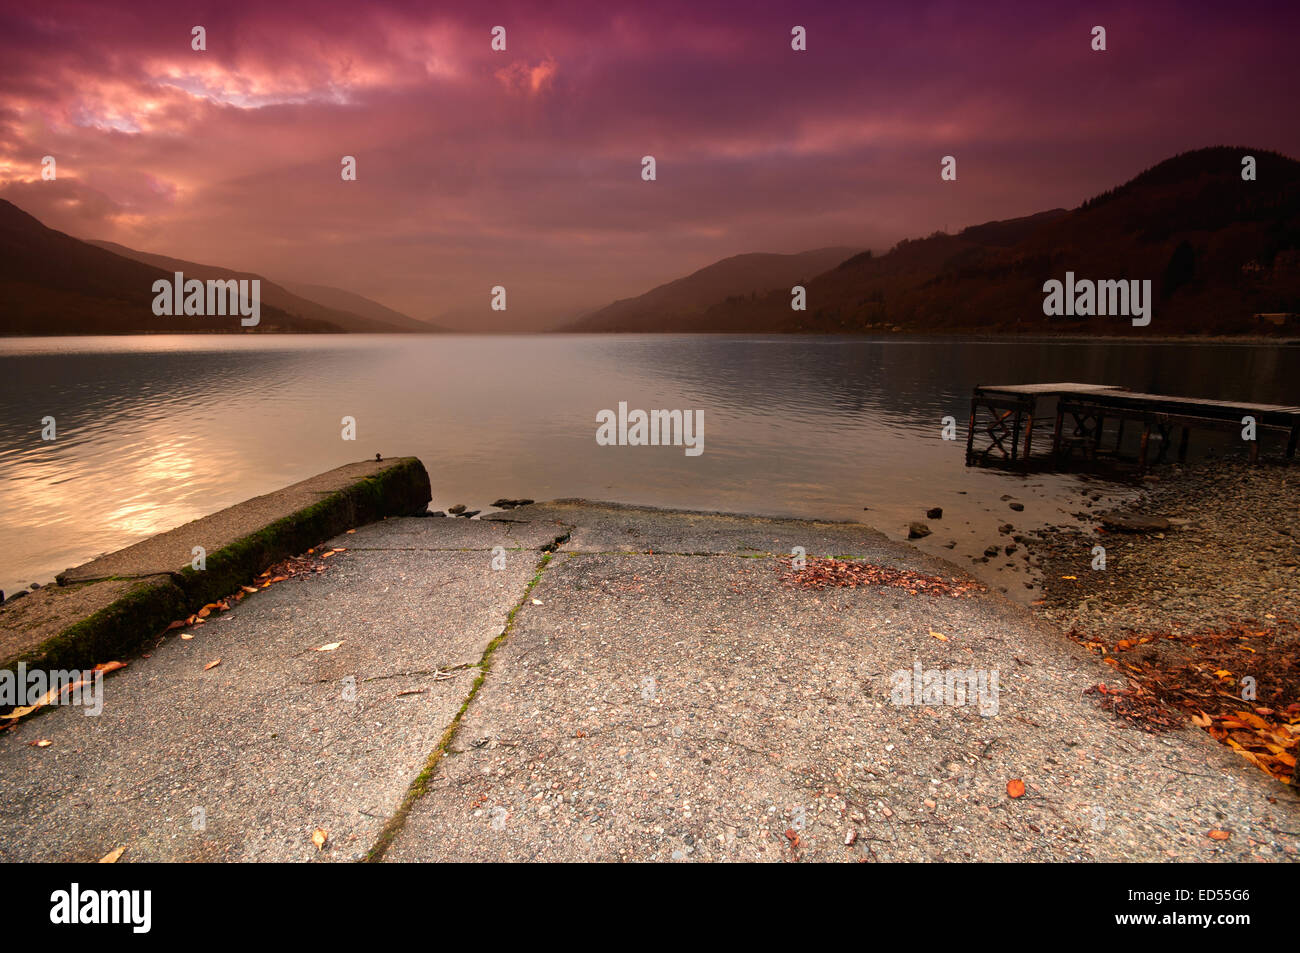 Looking down Loch Earn from St. Fillans in the Loch Lomond and Trossachs National Park, Scotland Stock Photo